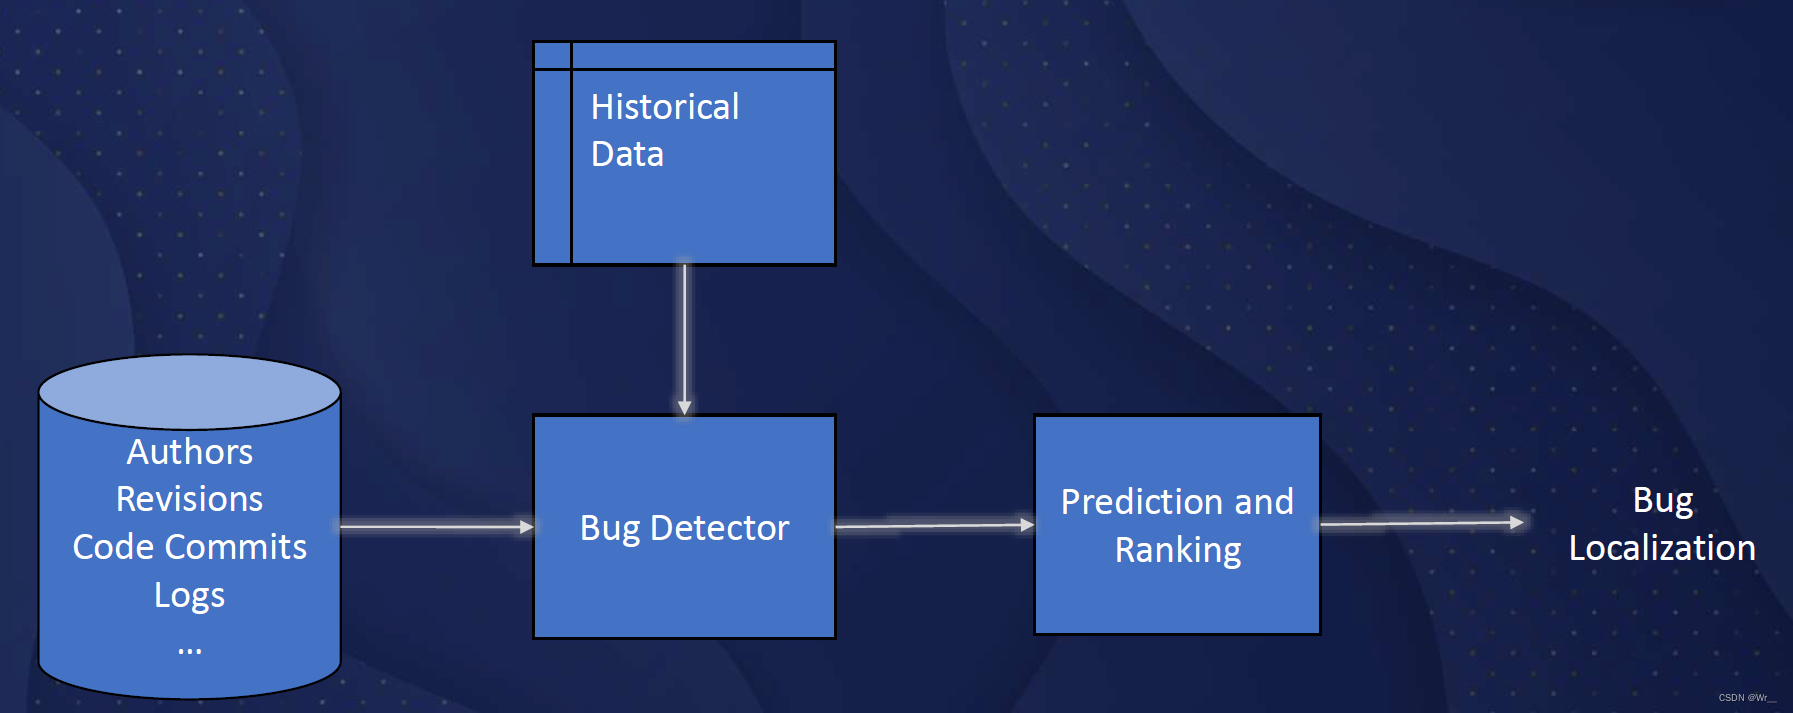 Bug Detection and Localization